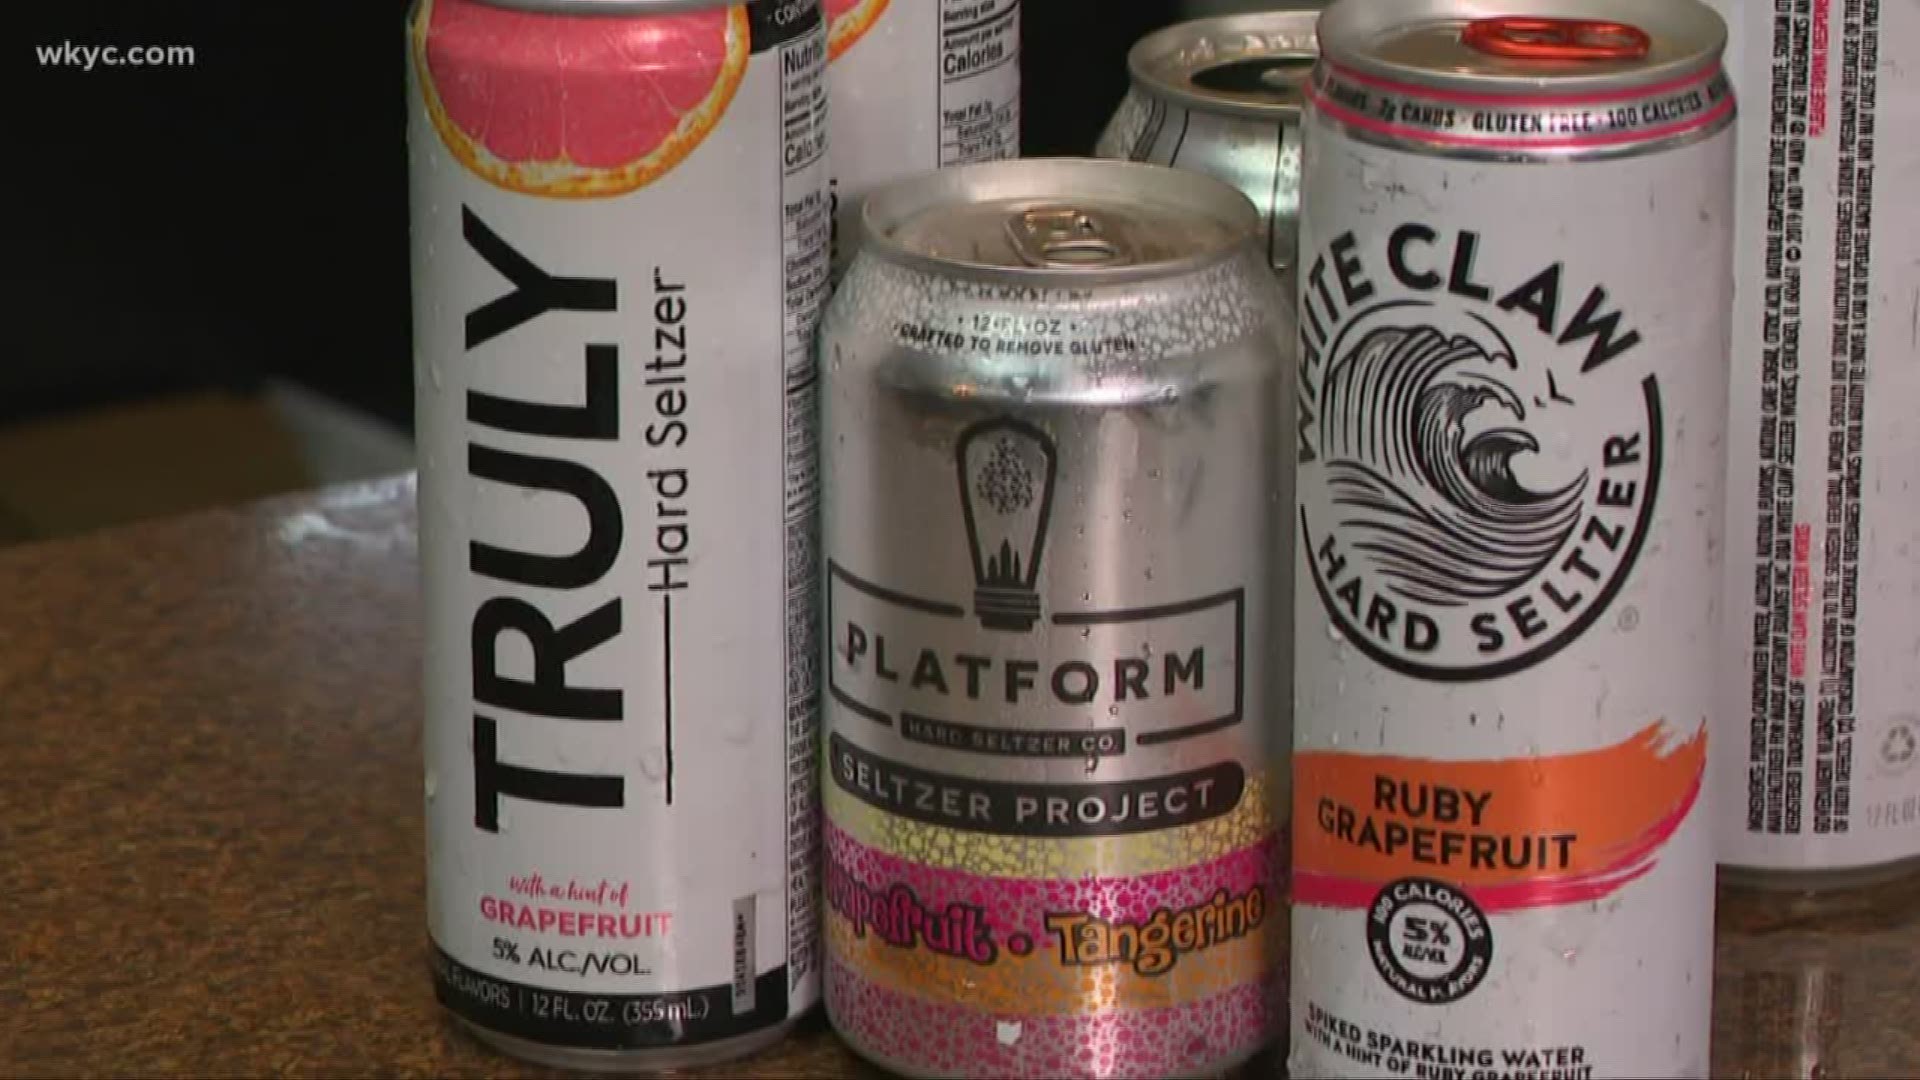 It's been the craze of the summer! Danielle Serino gathered a group of women and one man to see which spiked seltzer they rank as the best.